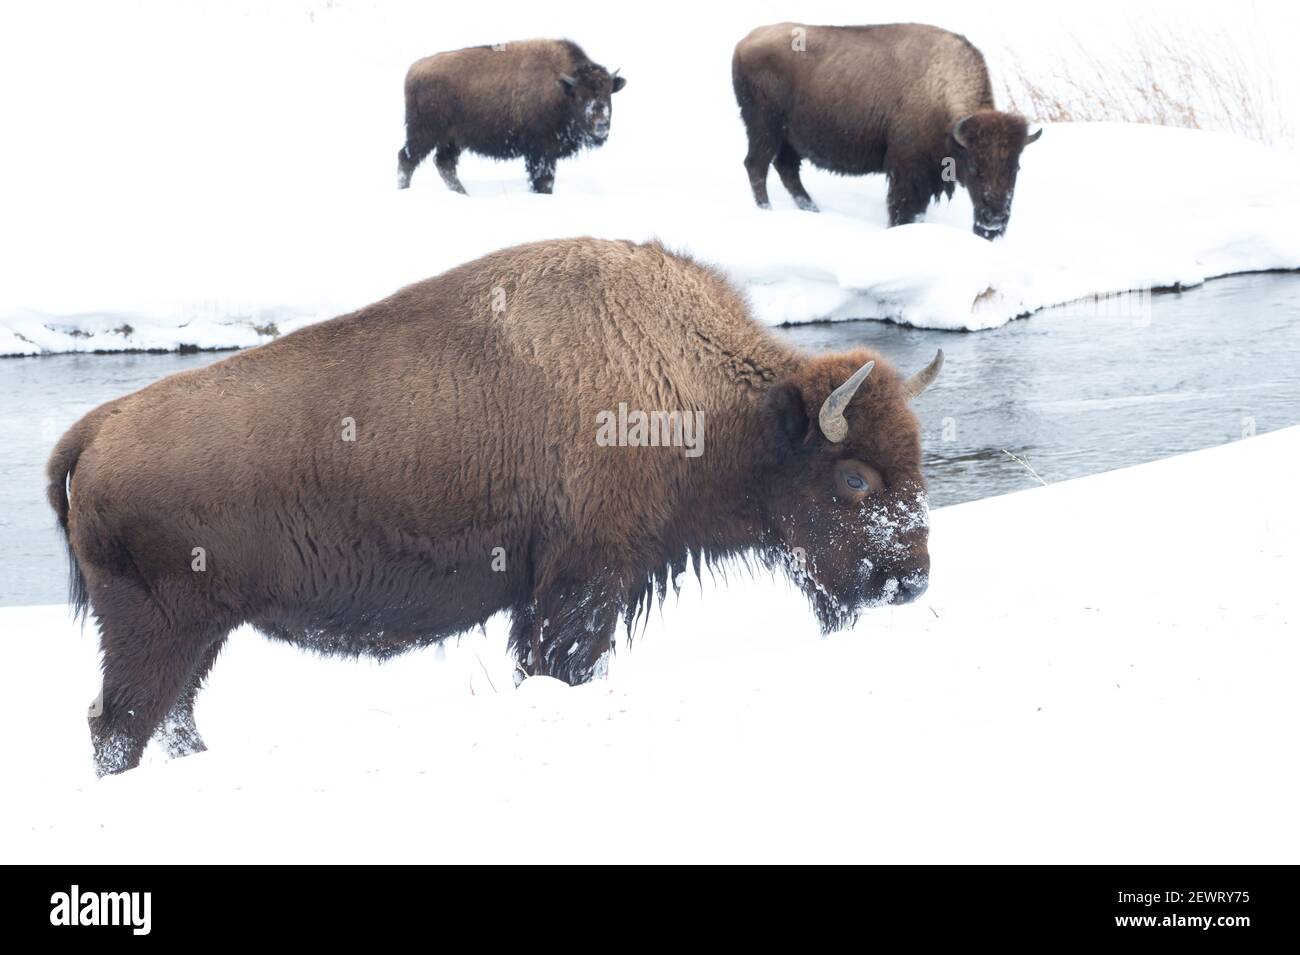 American bison (Bison Bison) in the snow on a river bank, Yellowstone National Park, UNESCO World Heritage Site, Wyoming, United States of America Stock Photo